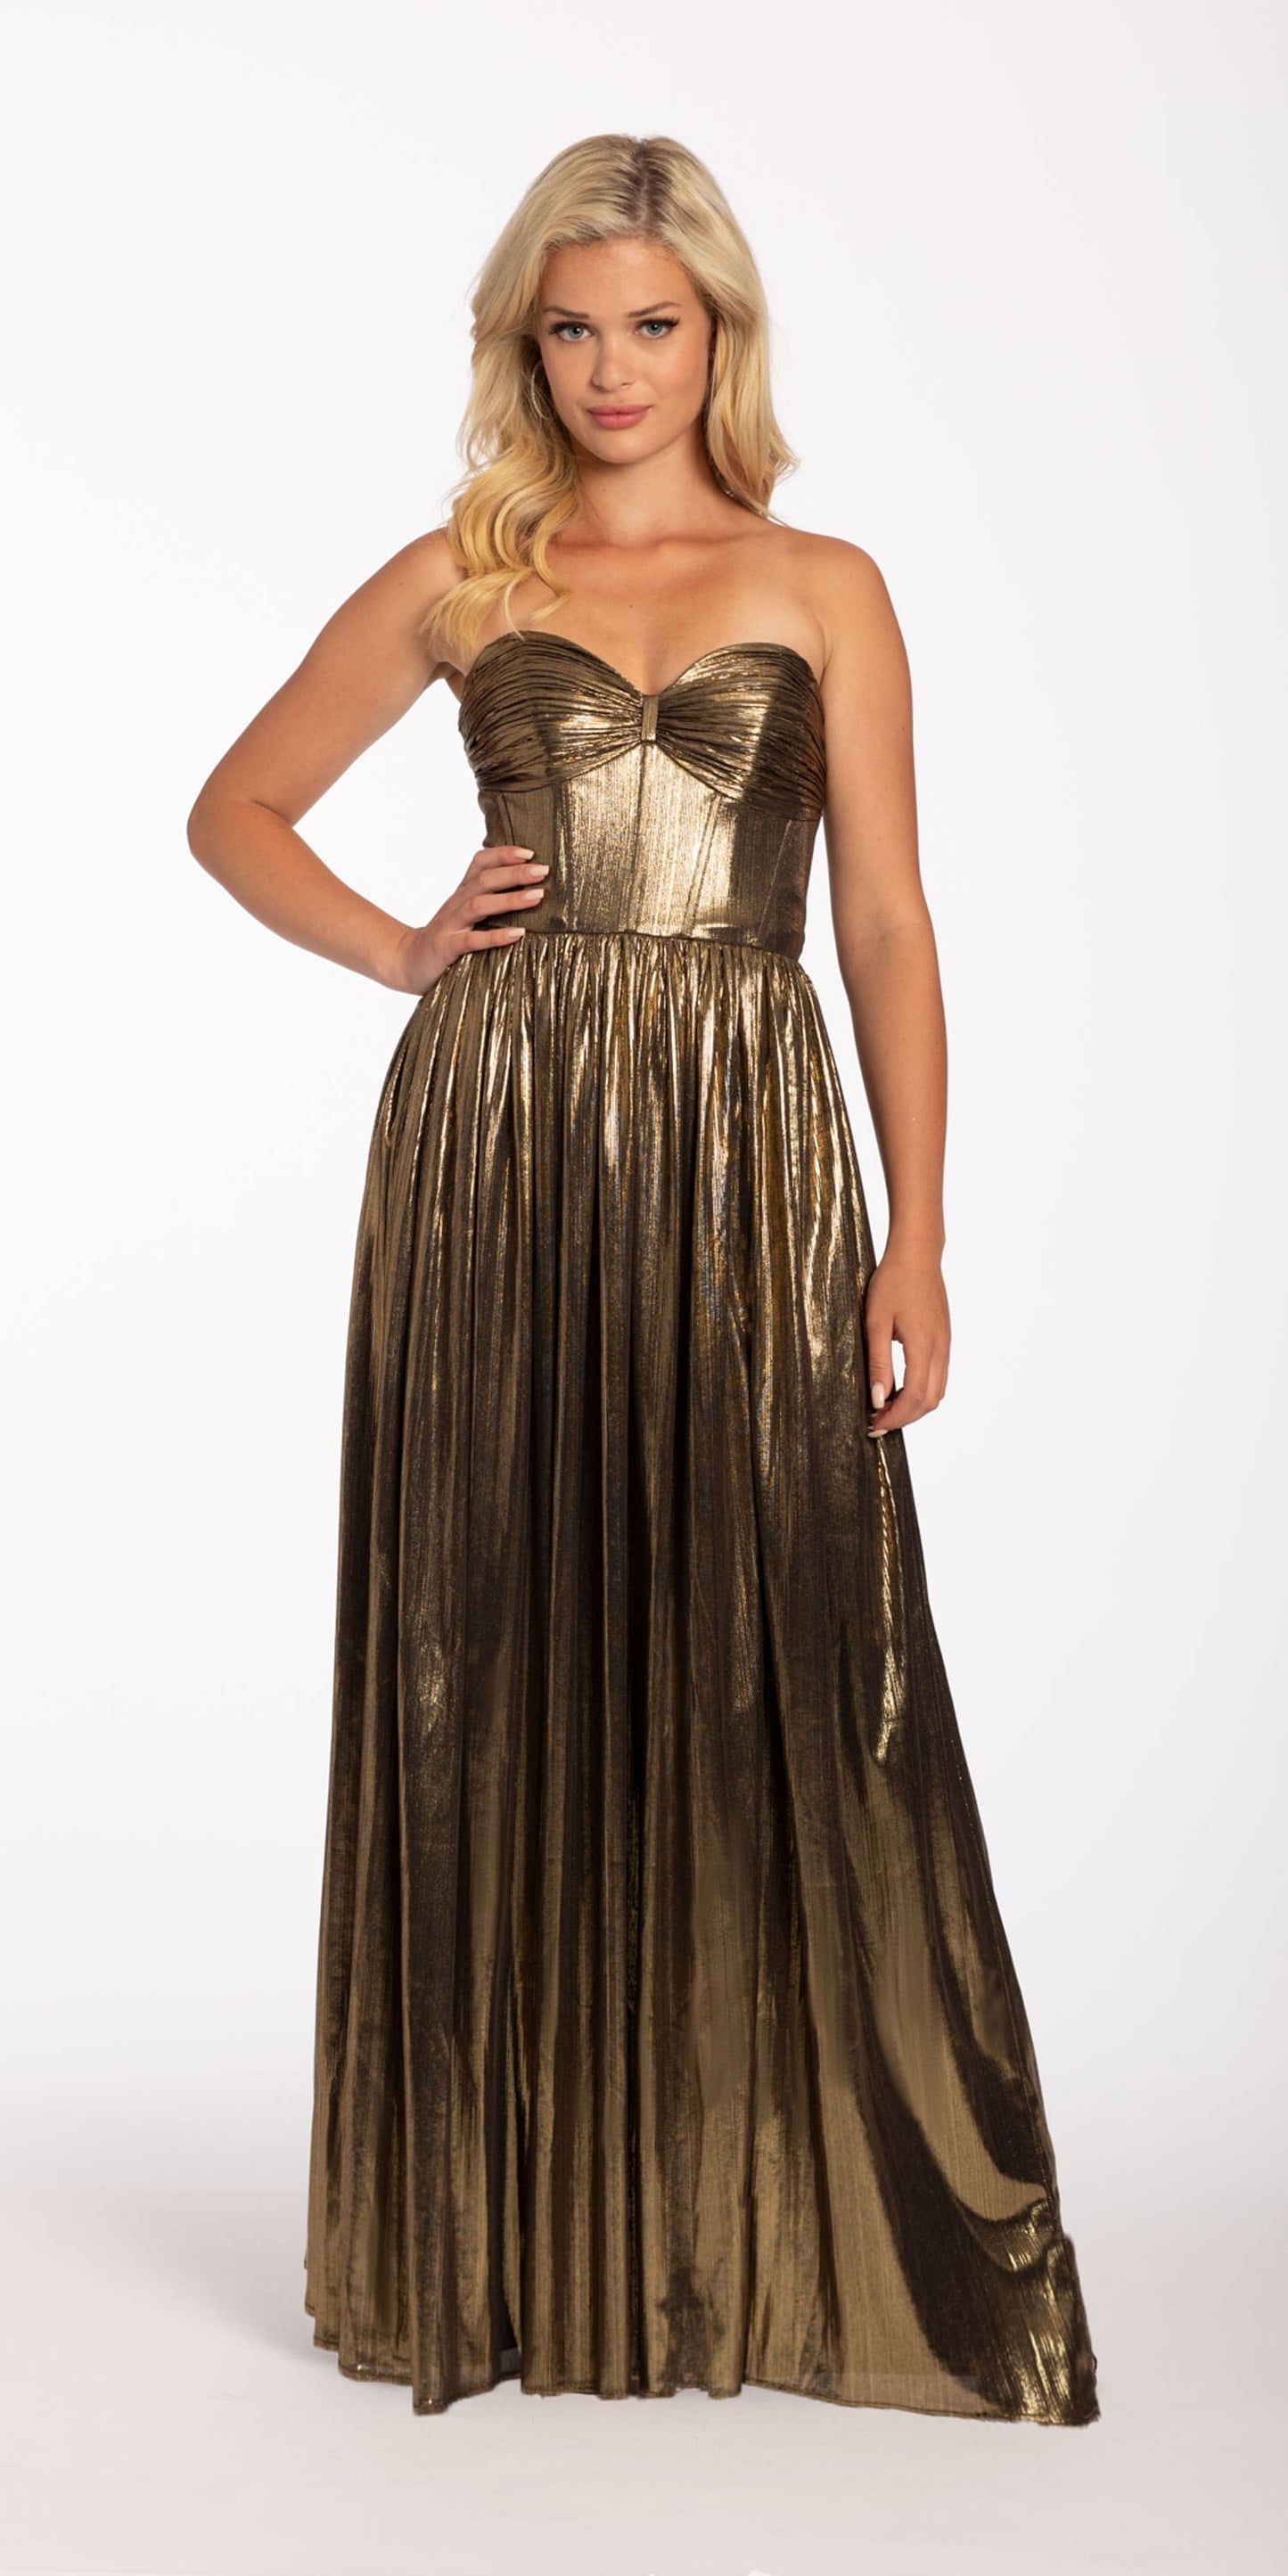 Camille La Vie Strapless Pleated Metallic Foil Lace Up Back Dress missy / 0 / gold